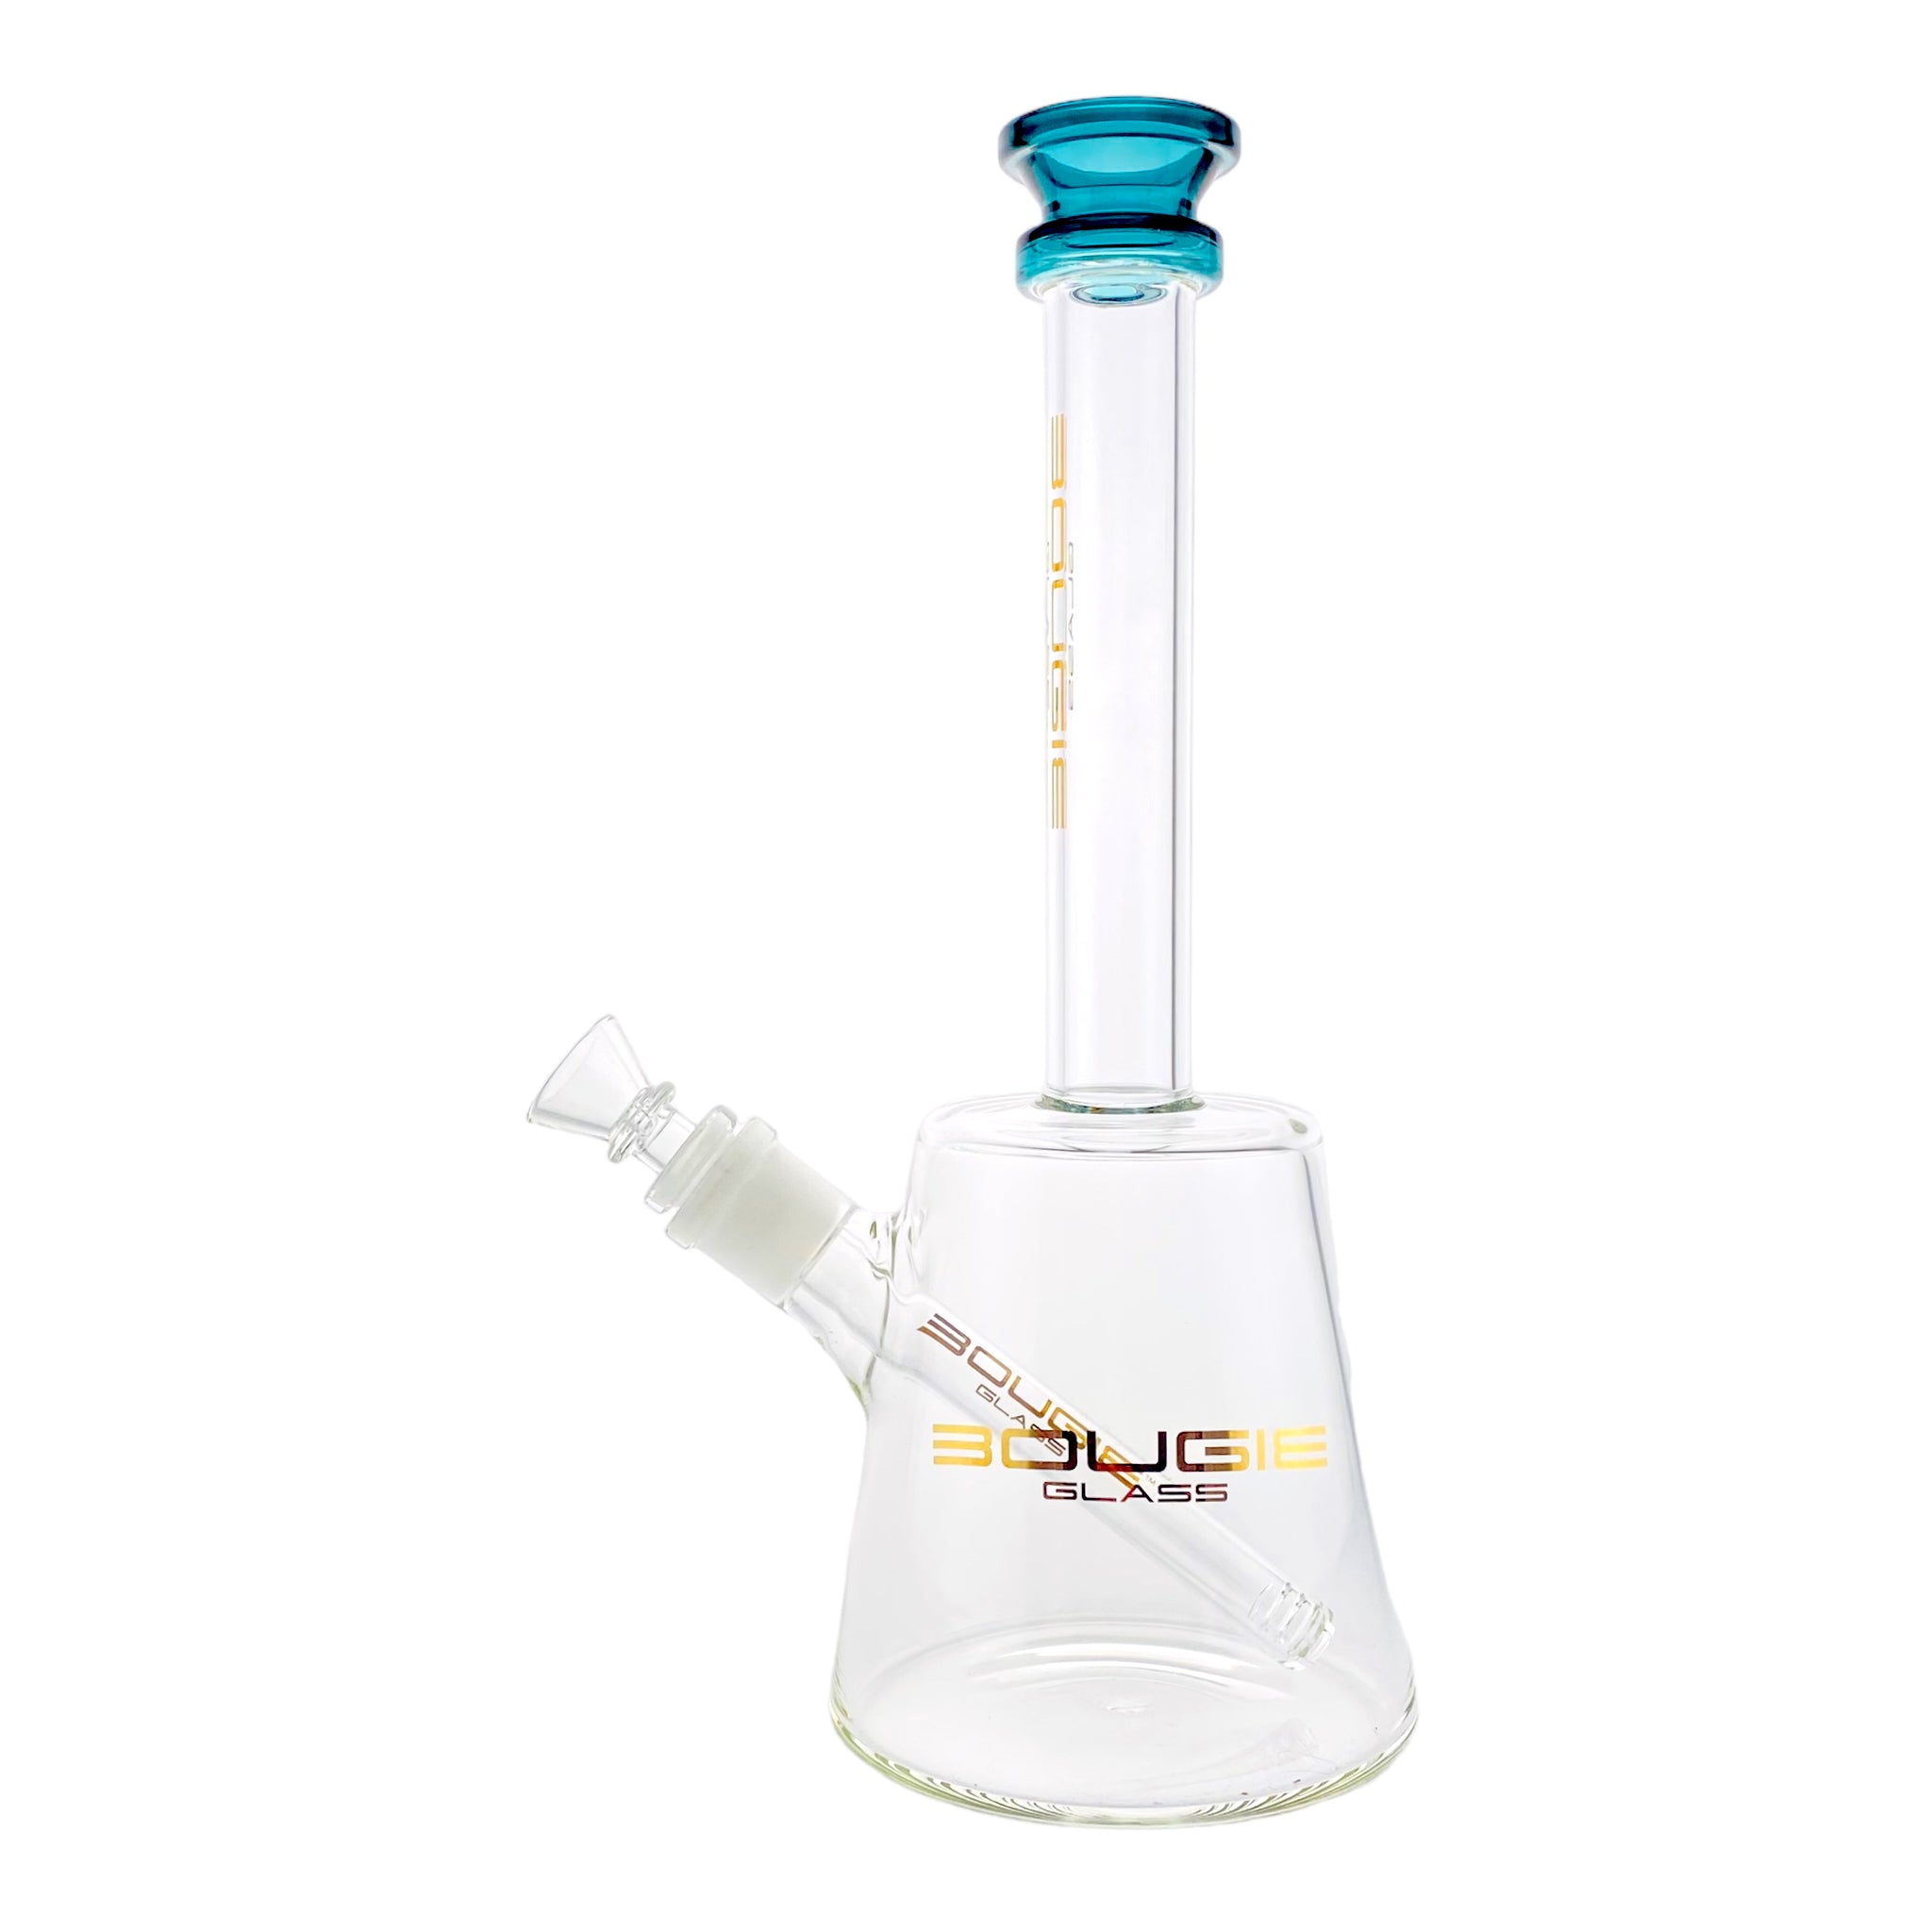 Bougie Glass - Slanted Cylinder Bong With Dark Green Mouthpiece